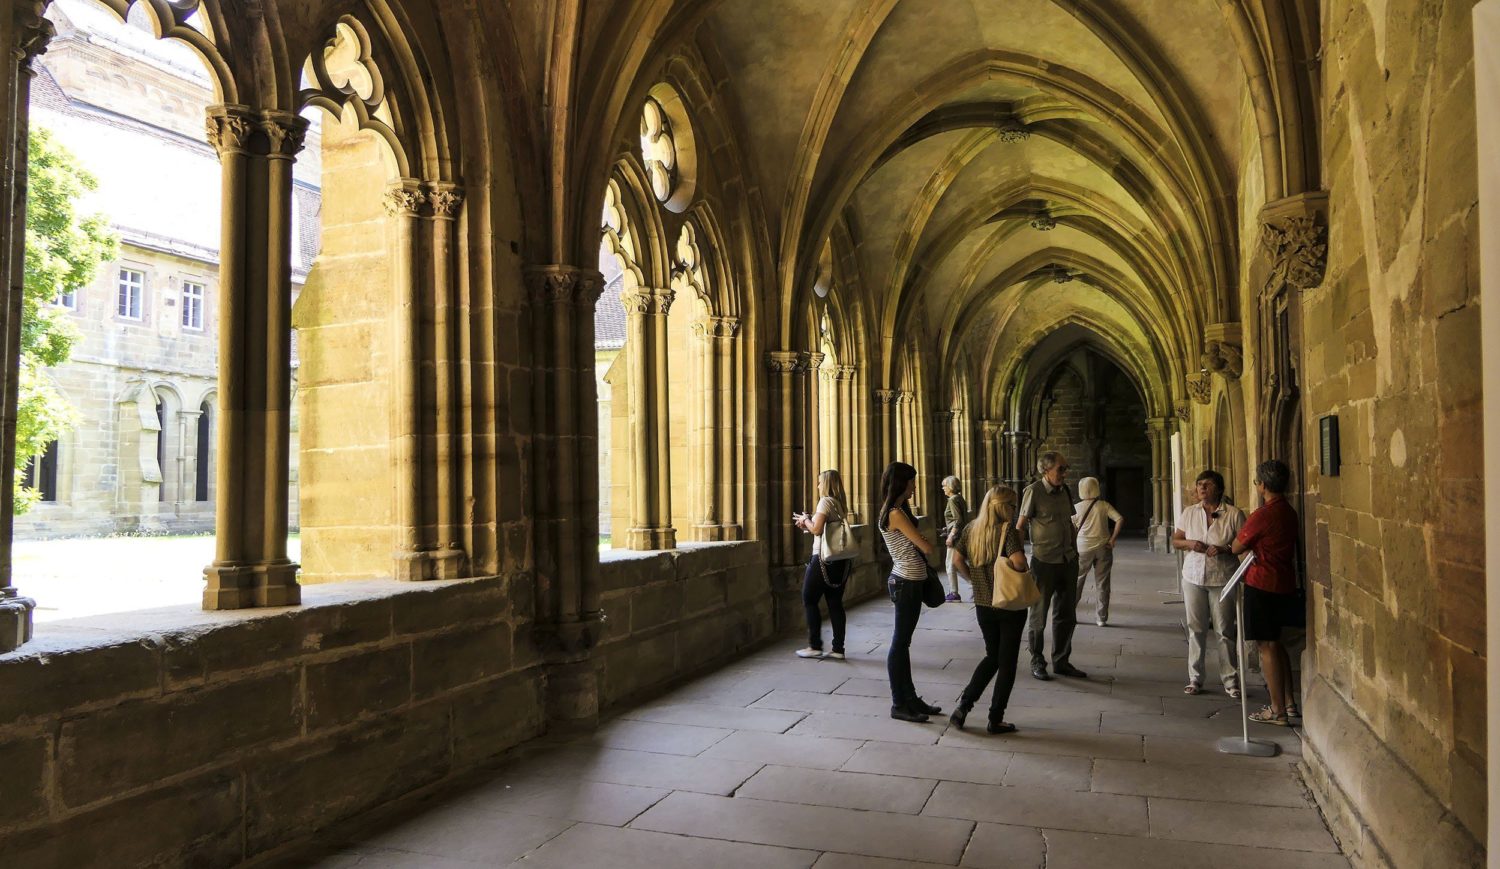 The early Gothic south wing of the cloister was formerly used for reading © cmr - Joachim Negwer